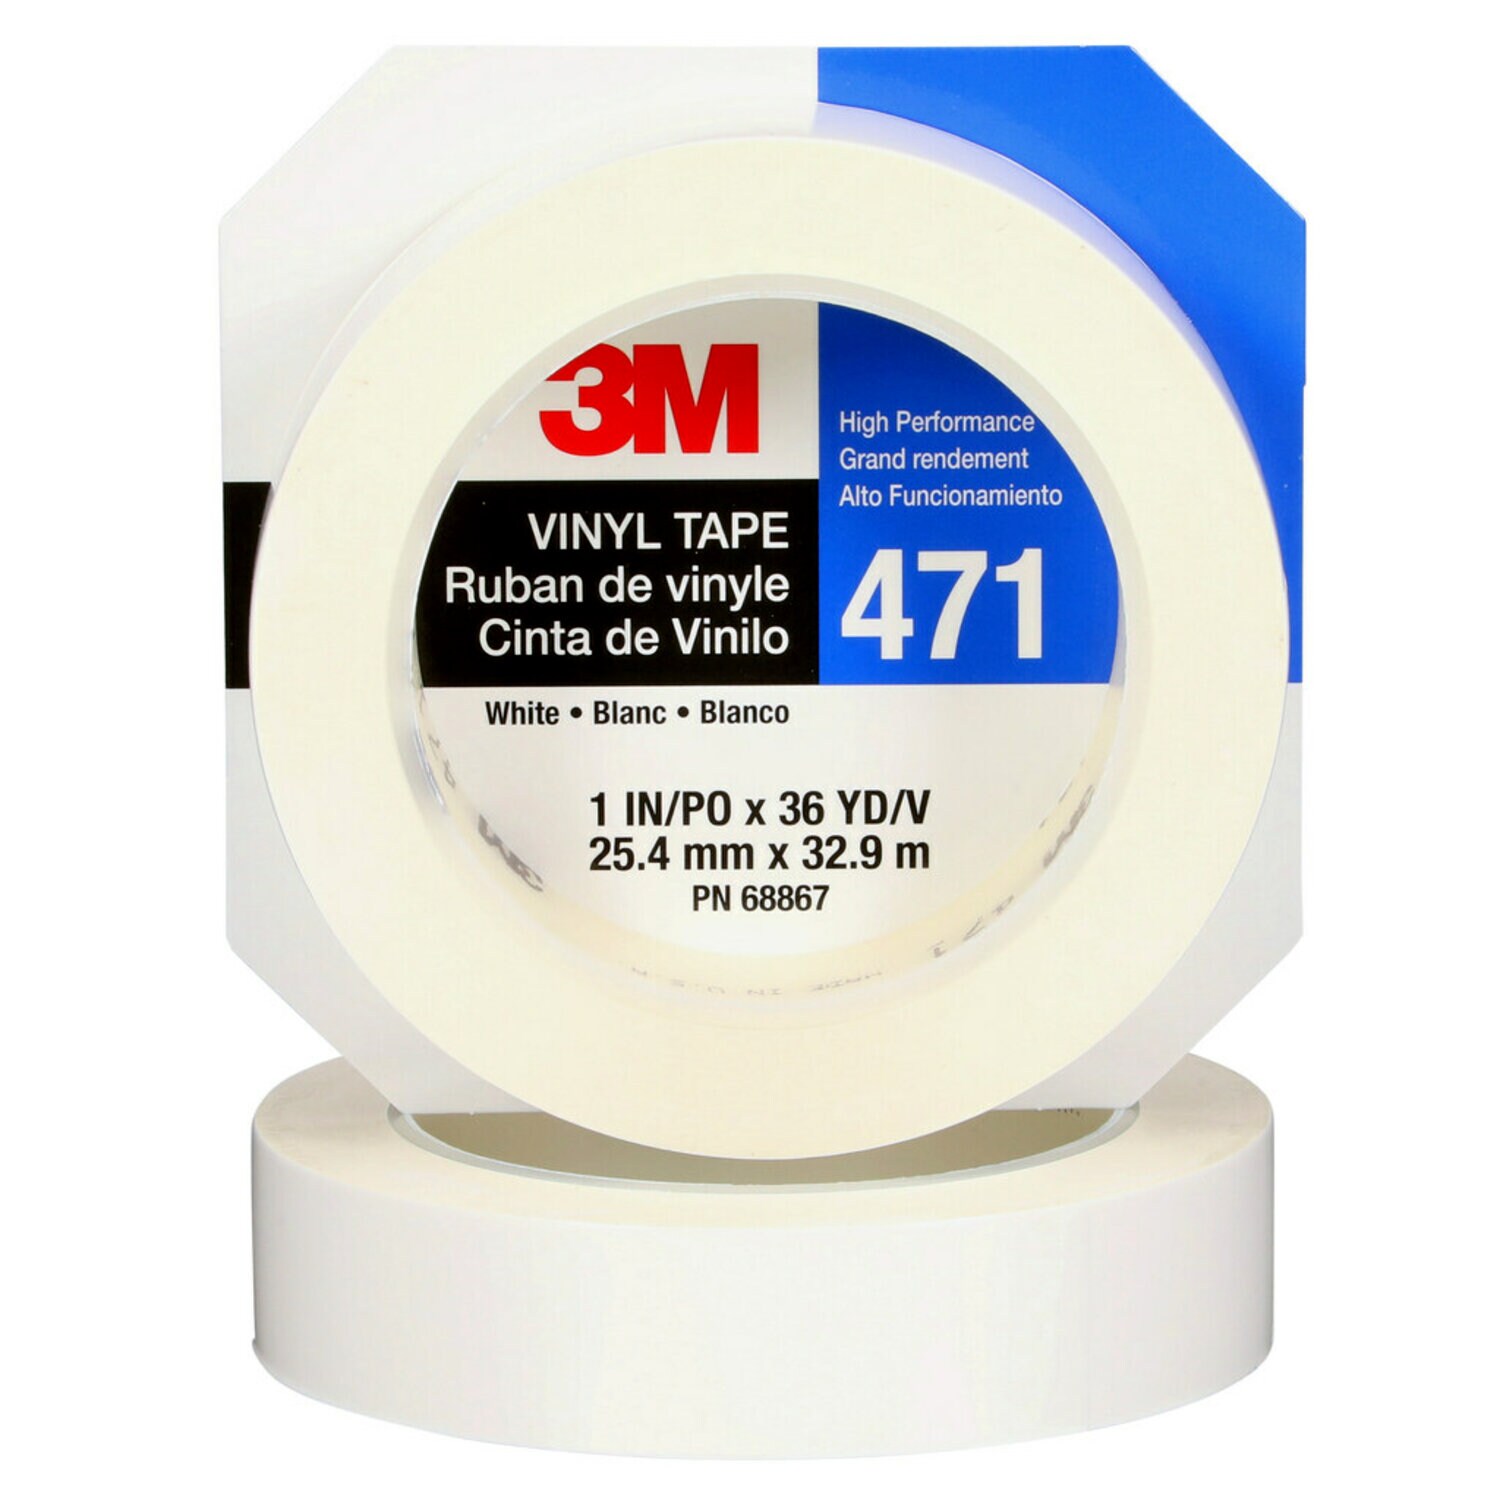 7100044644 - 3M Vinyl Tape 471, White, 1 in x 36 yd, 5.2 mil, 36 rolls per case,
Individually Wrapped Conveniently Packaged